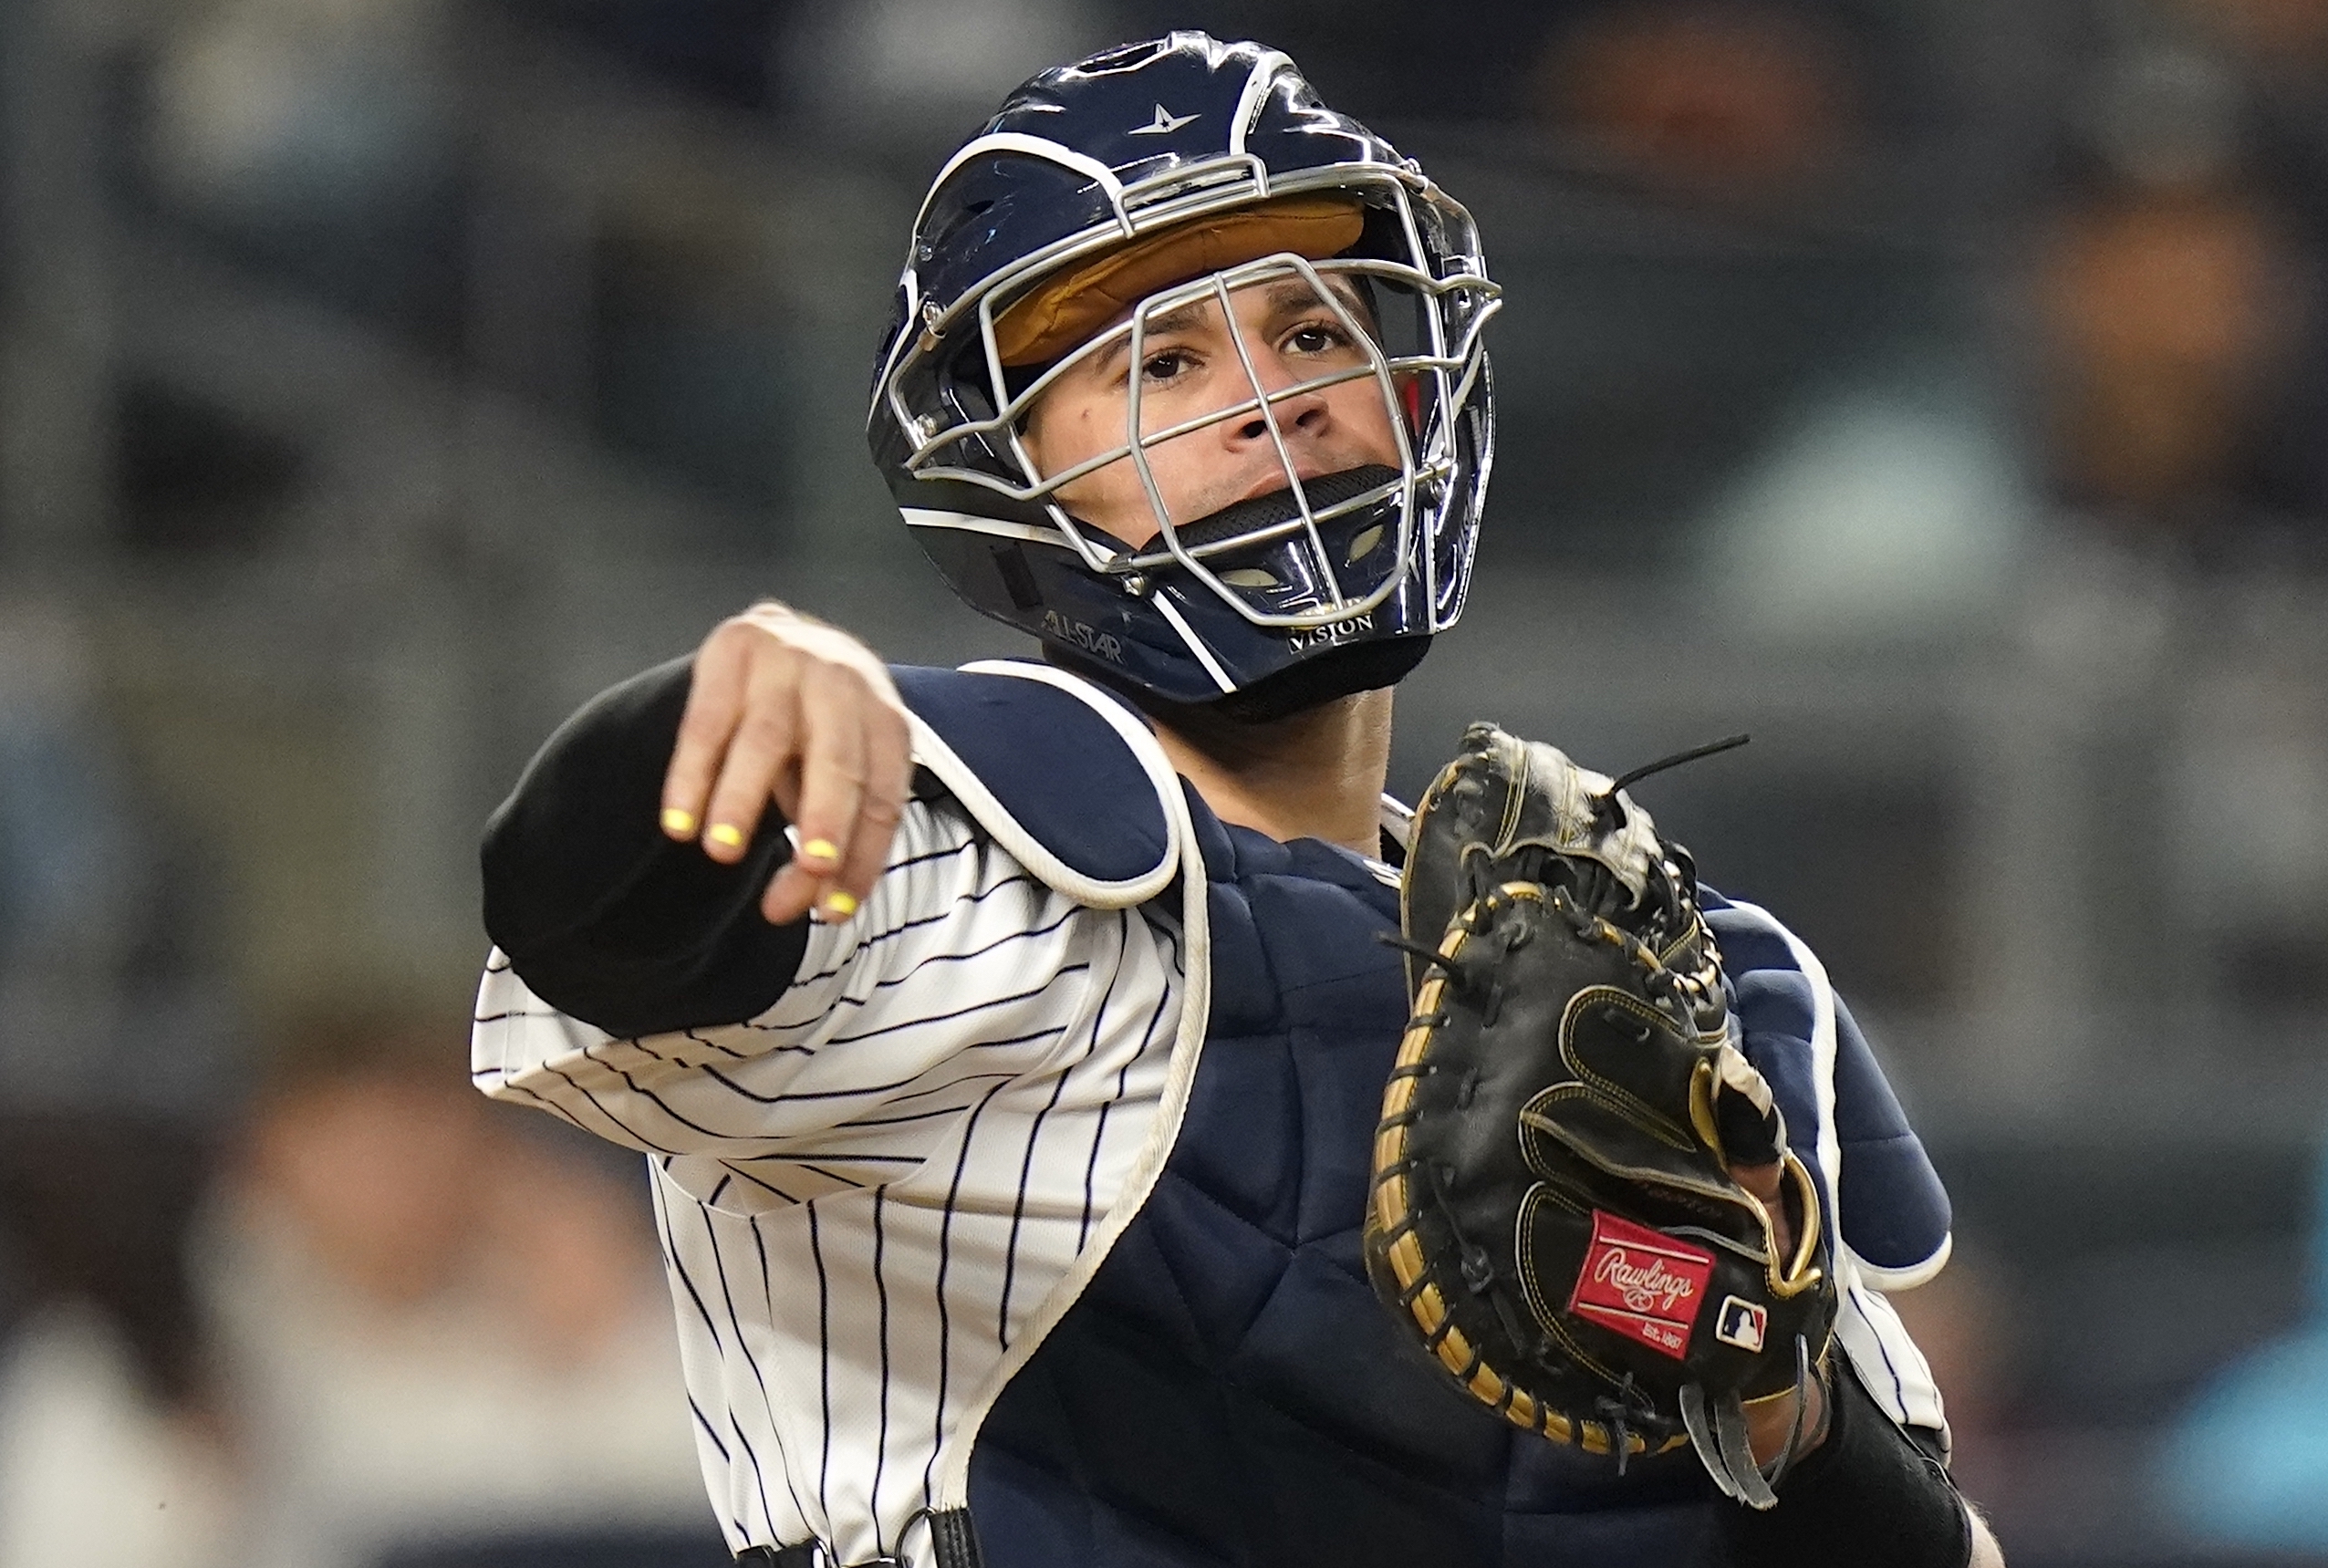 Yankees' Catcher Gary Sánchez Latest Player to Test Positive for